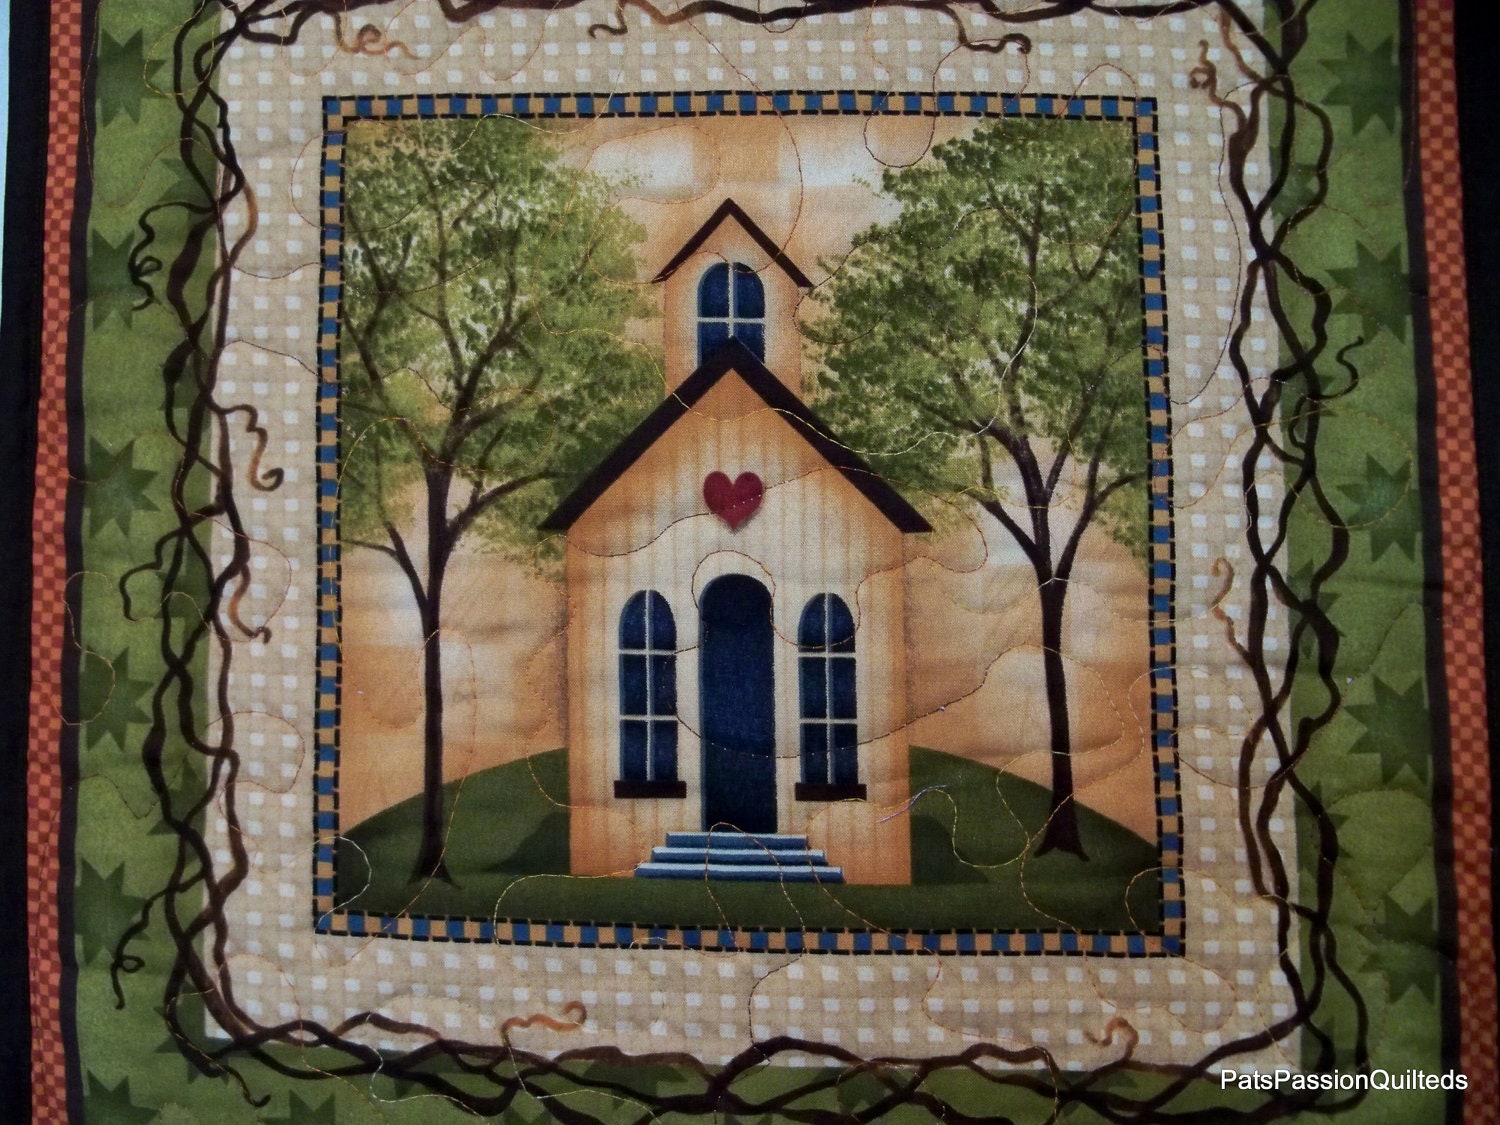 Fall Wall Hanging School House Browns, Oranges, Greens - PatsPassionQuilteds